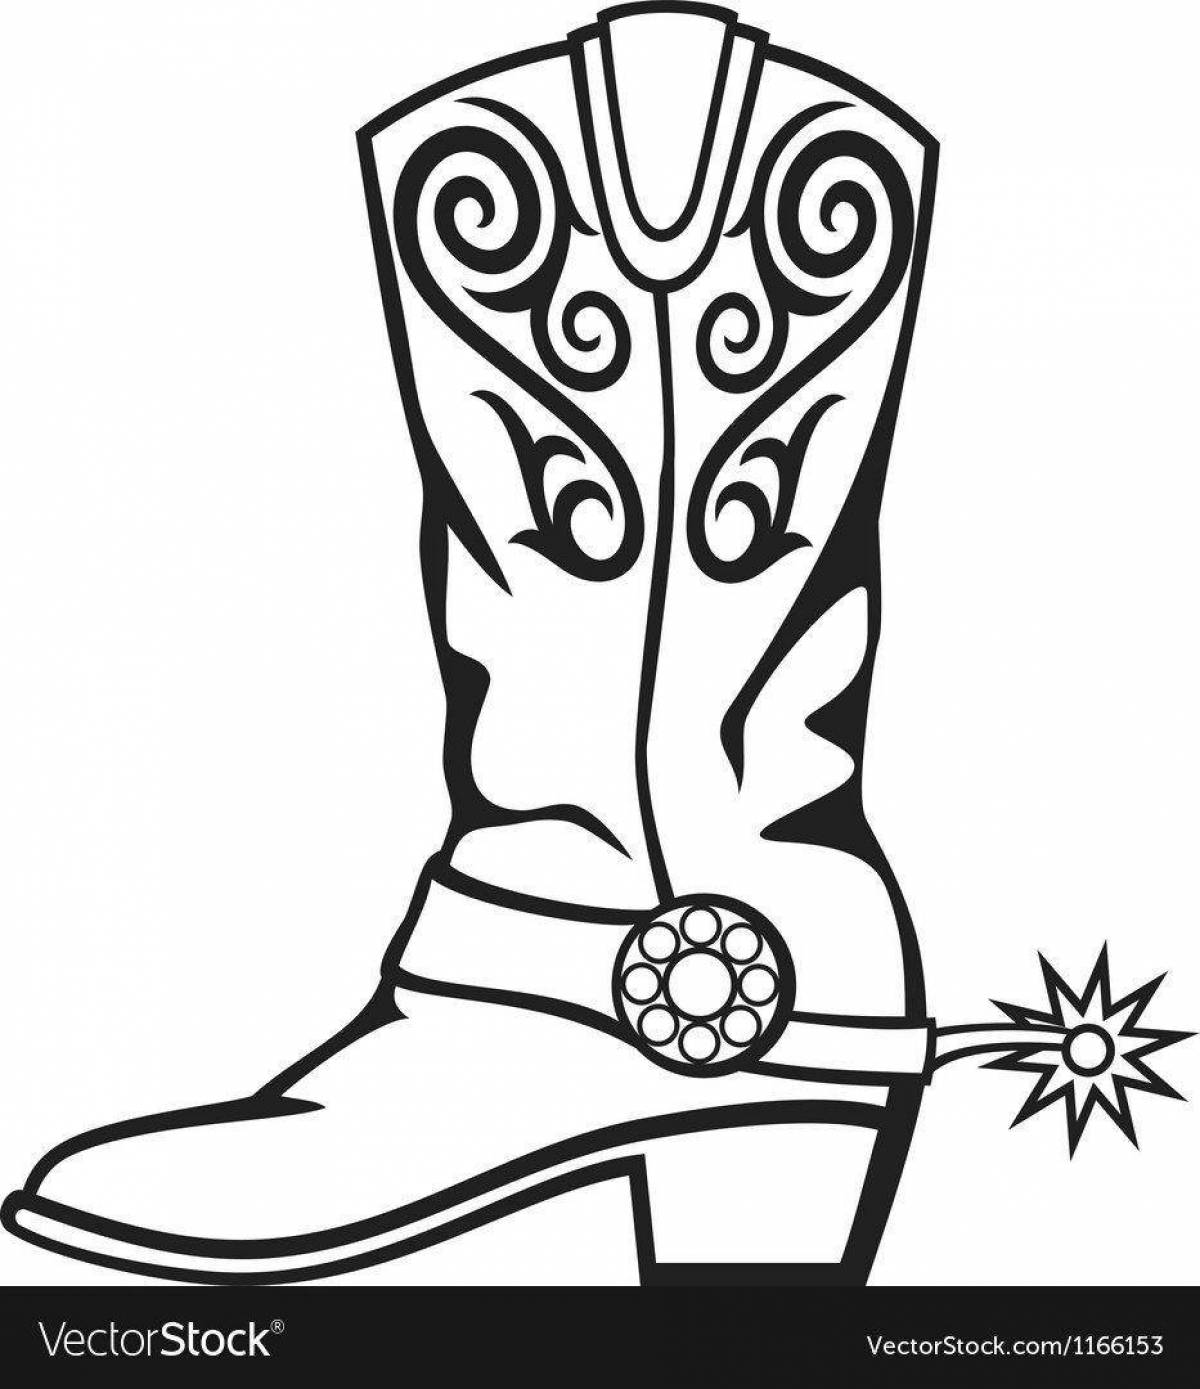 Fine walking boots coloring page